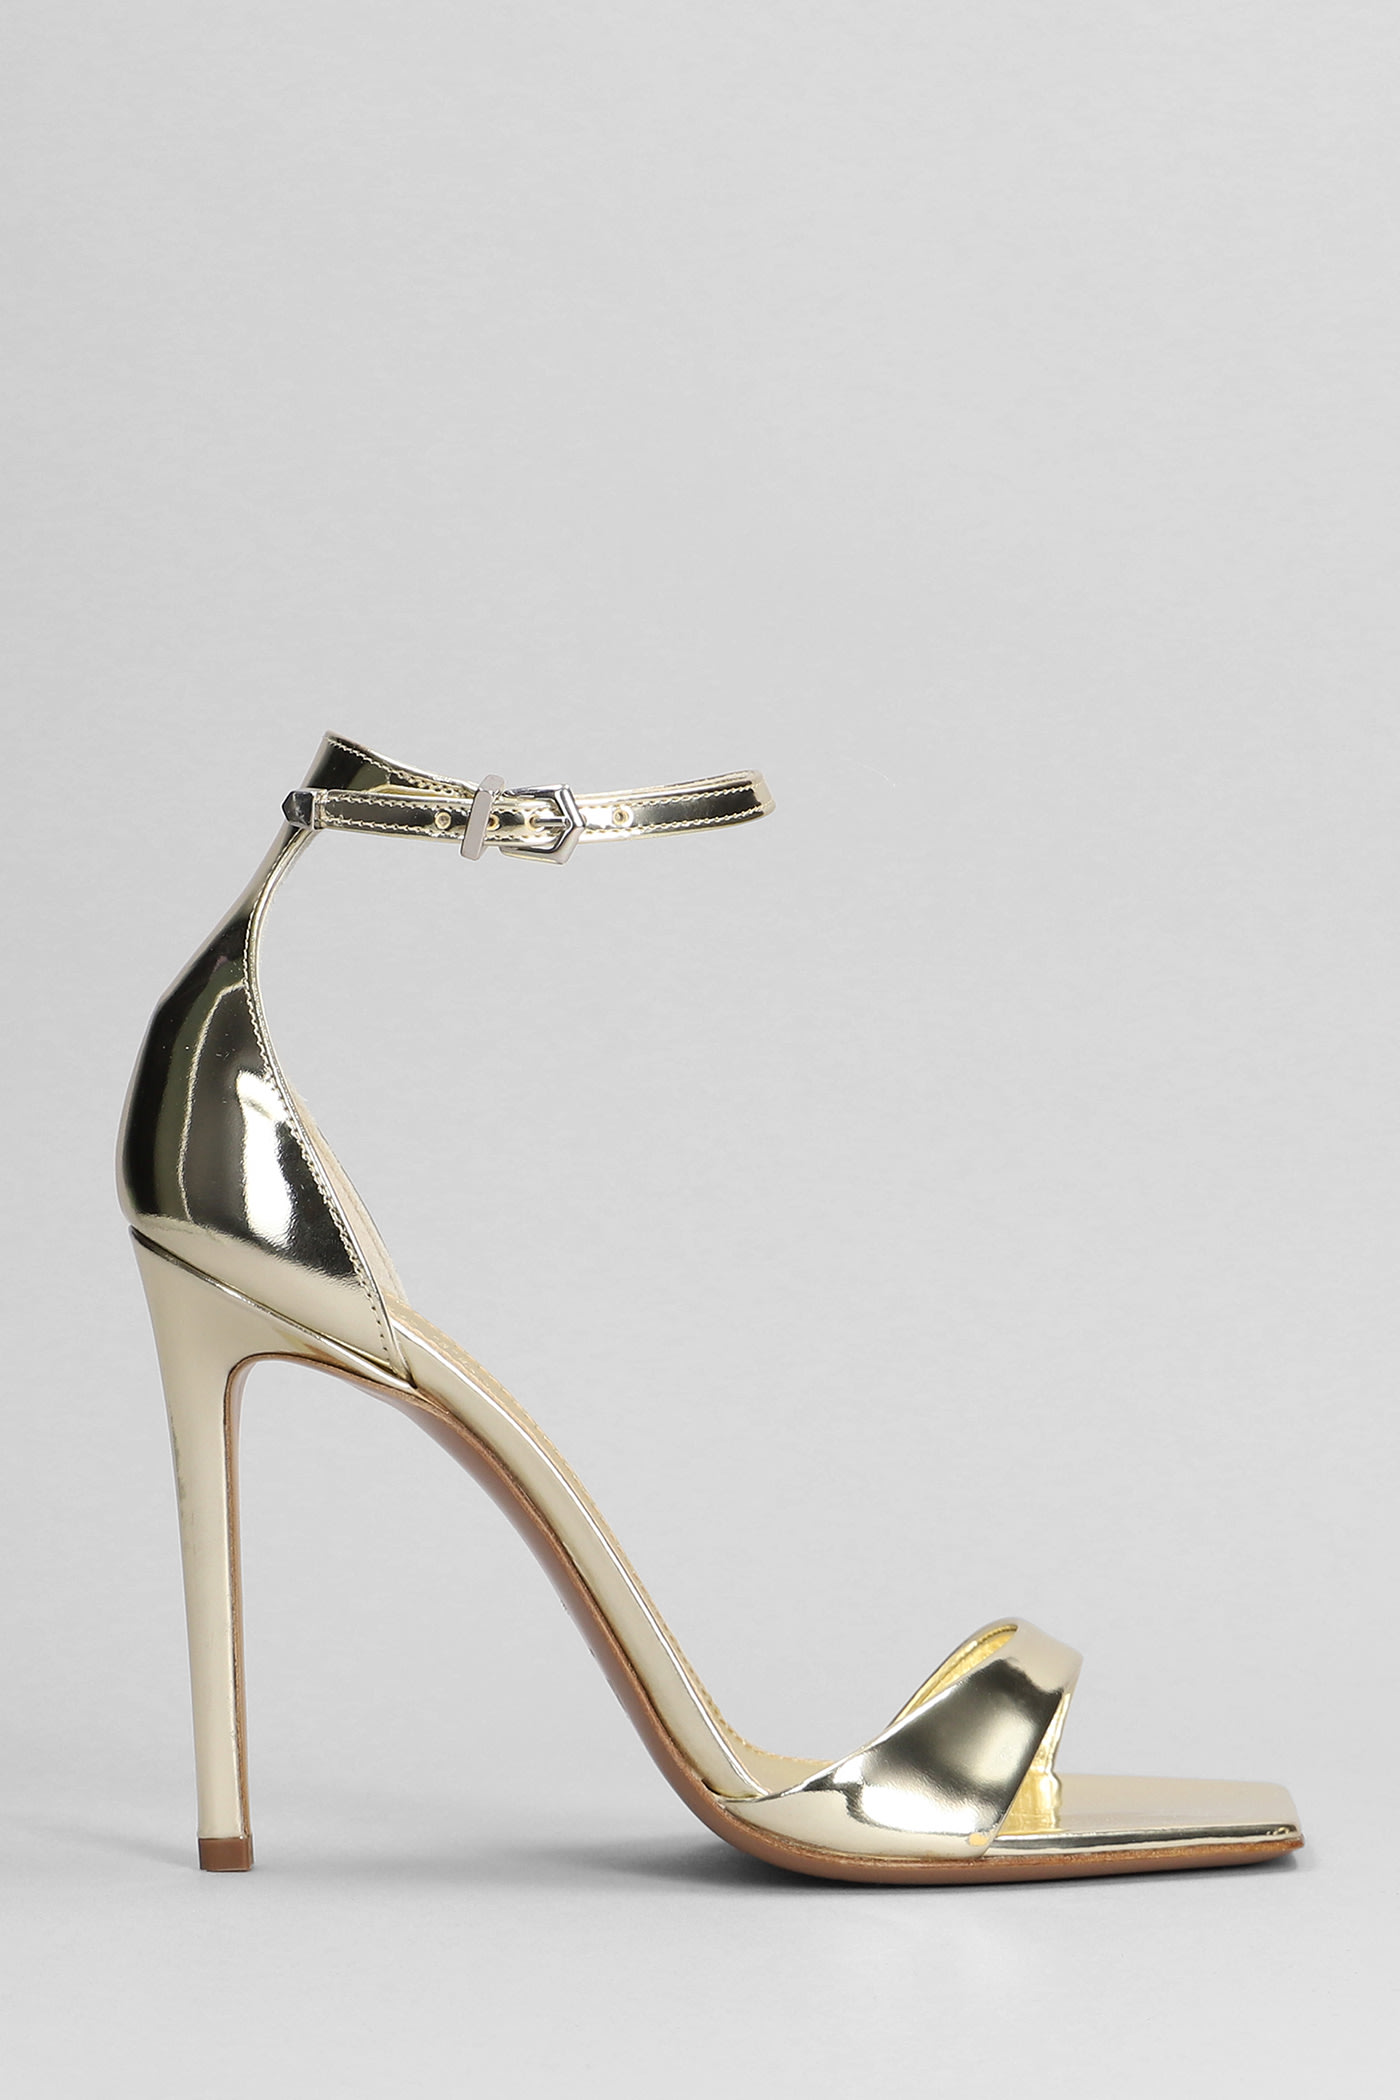 Paris Texas Sandals In Gold Leather